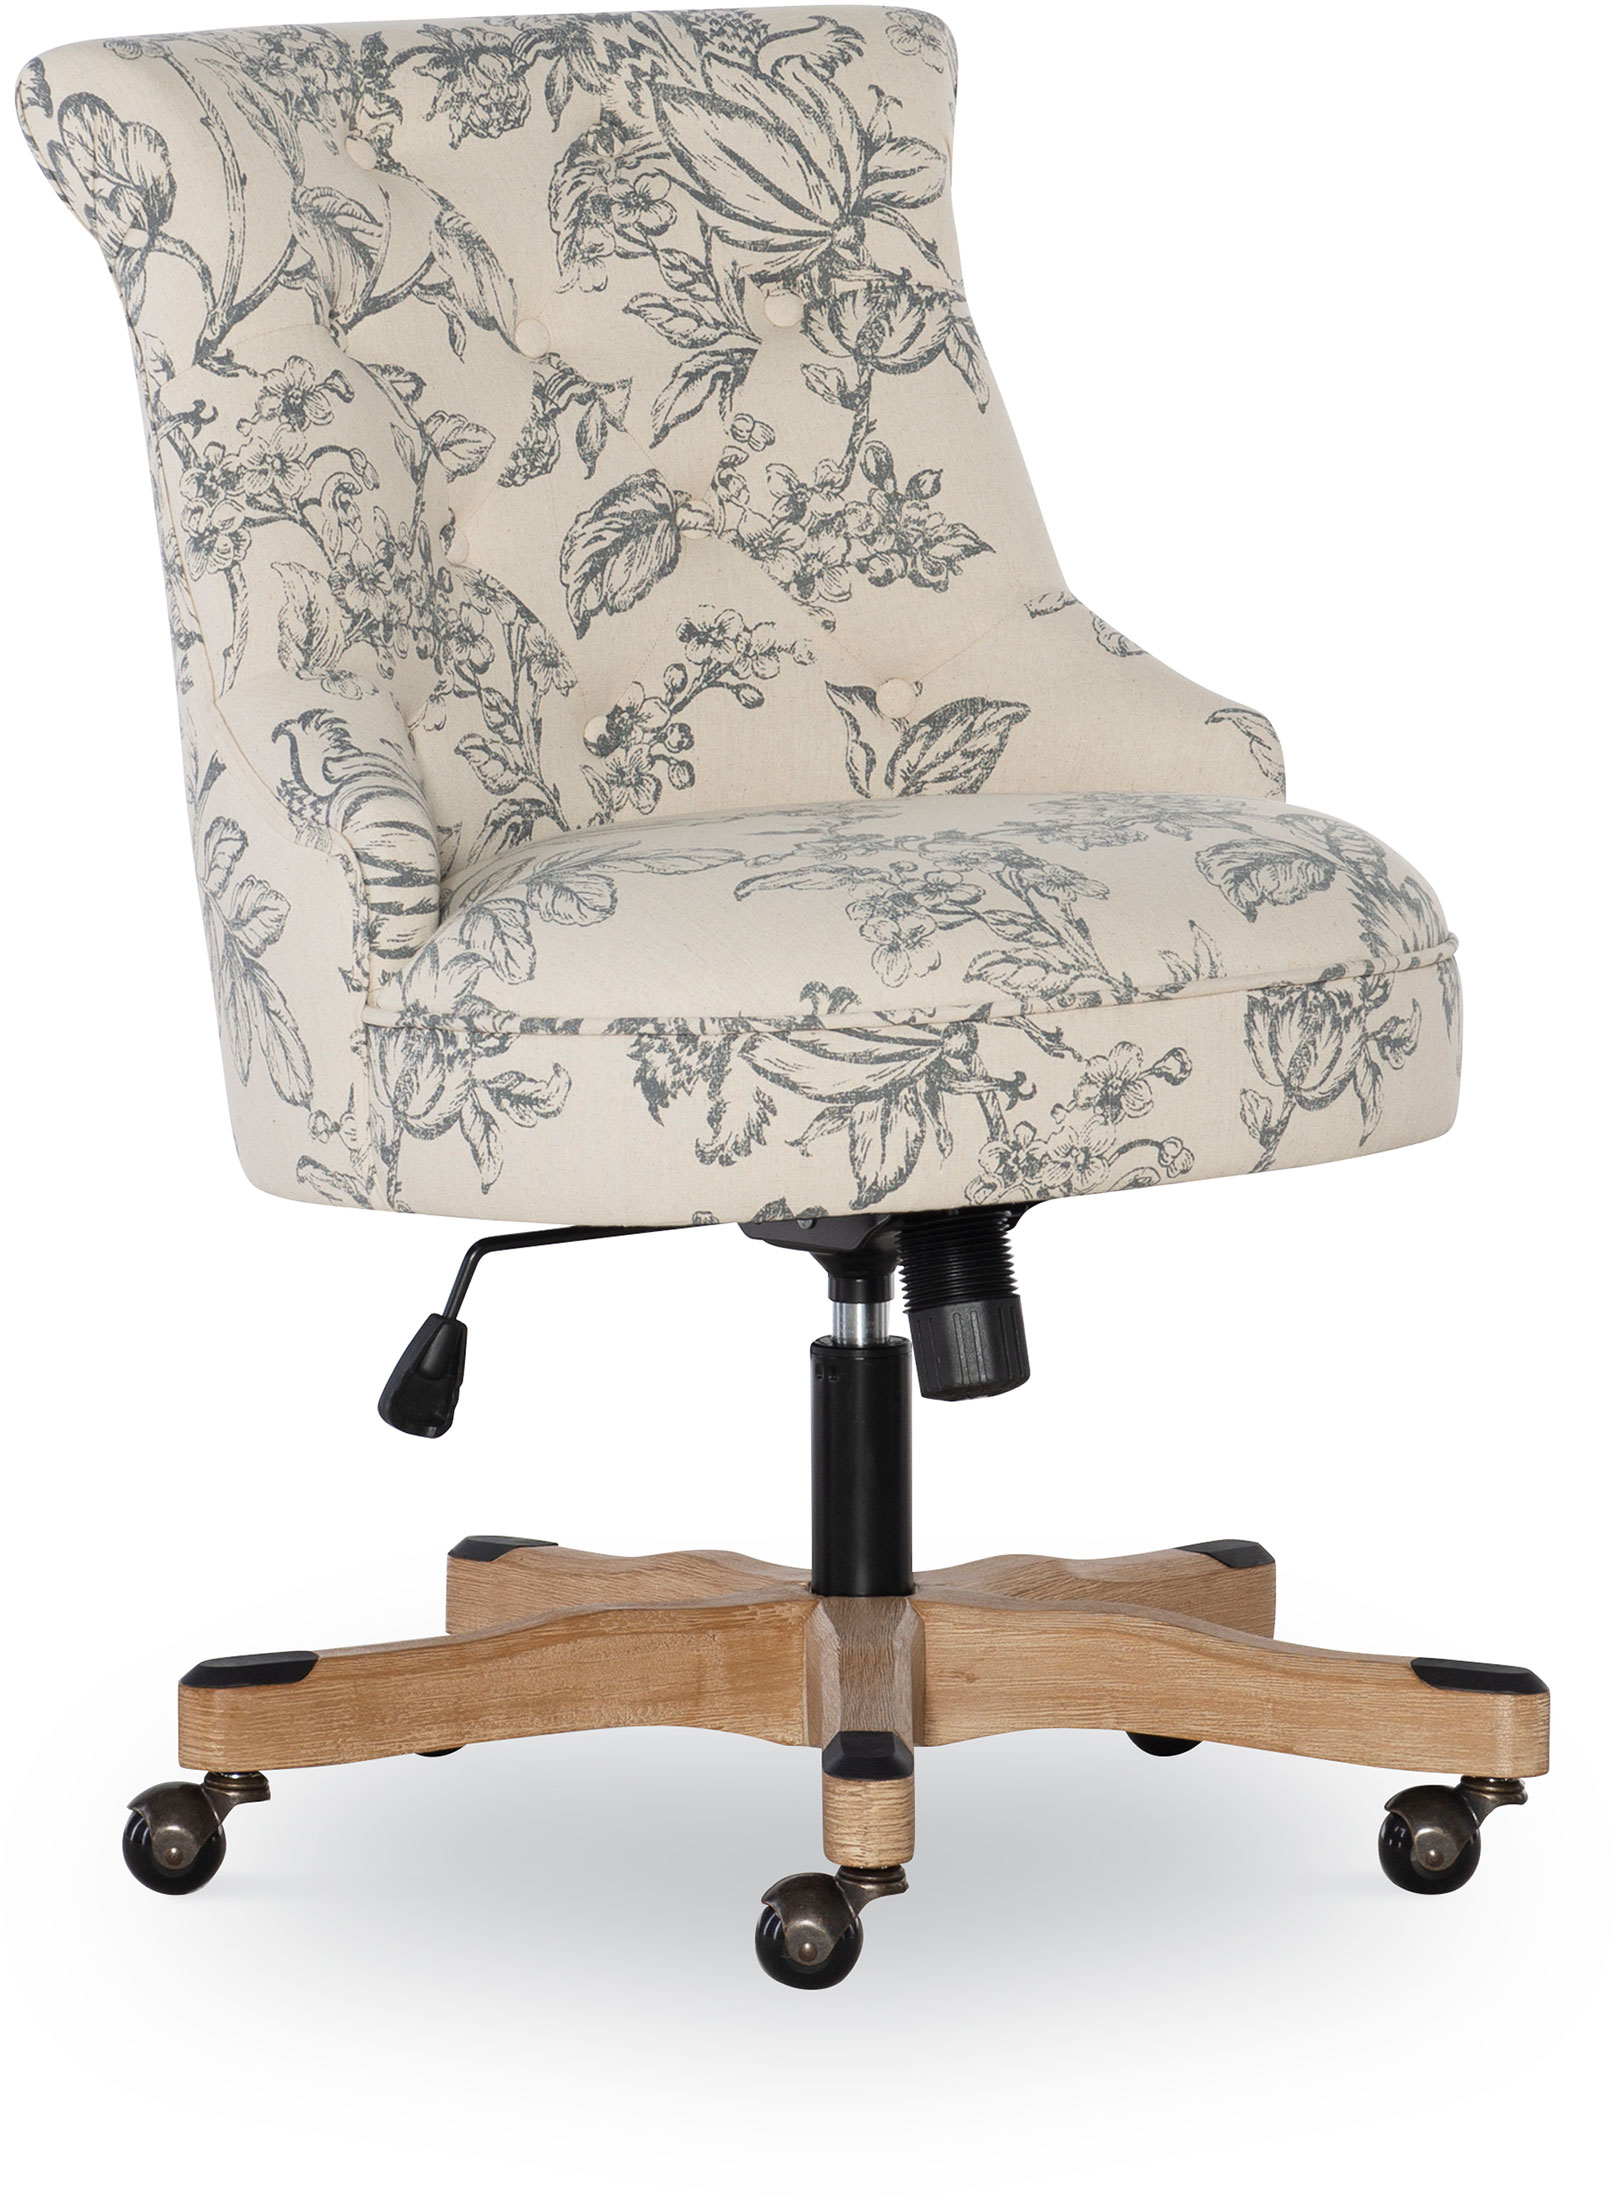 Dixie Office Chair Value City Furniture, Multicolor Desk Chair